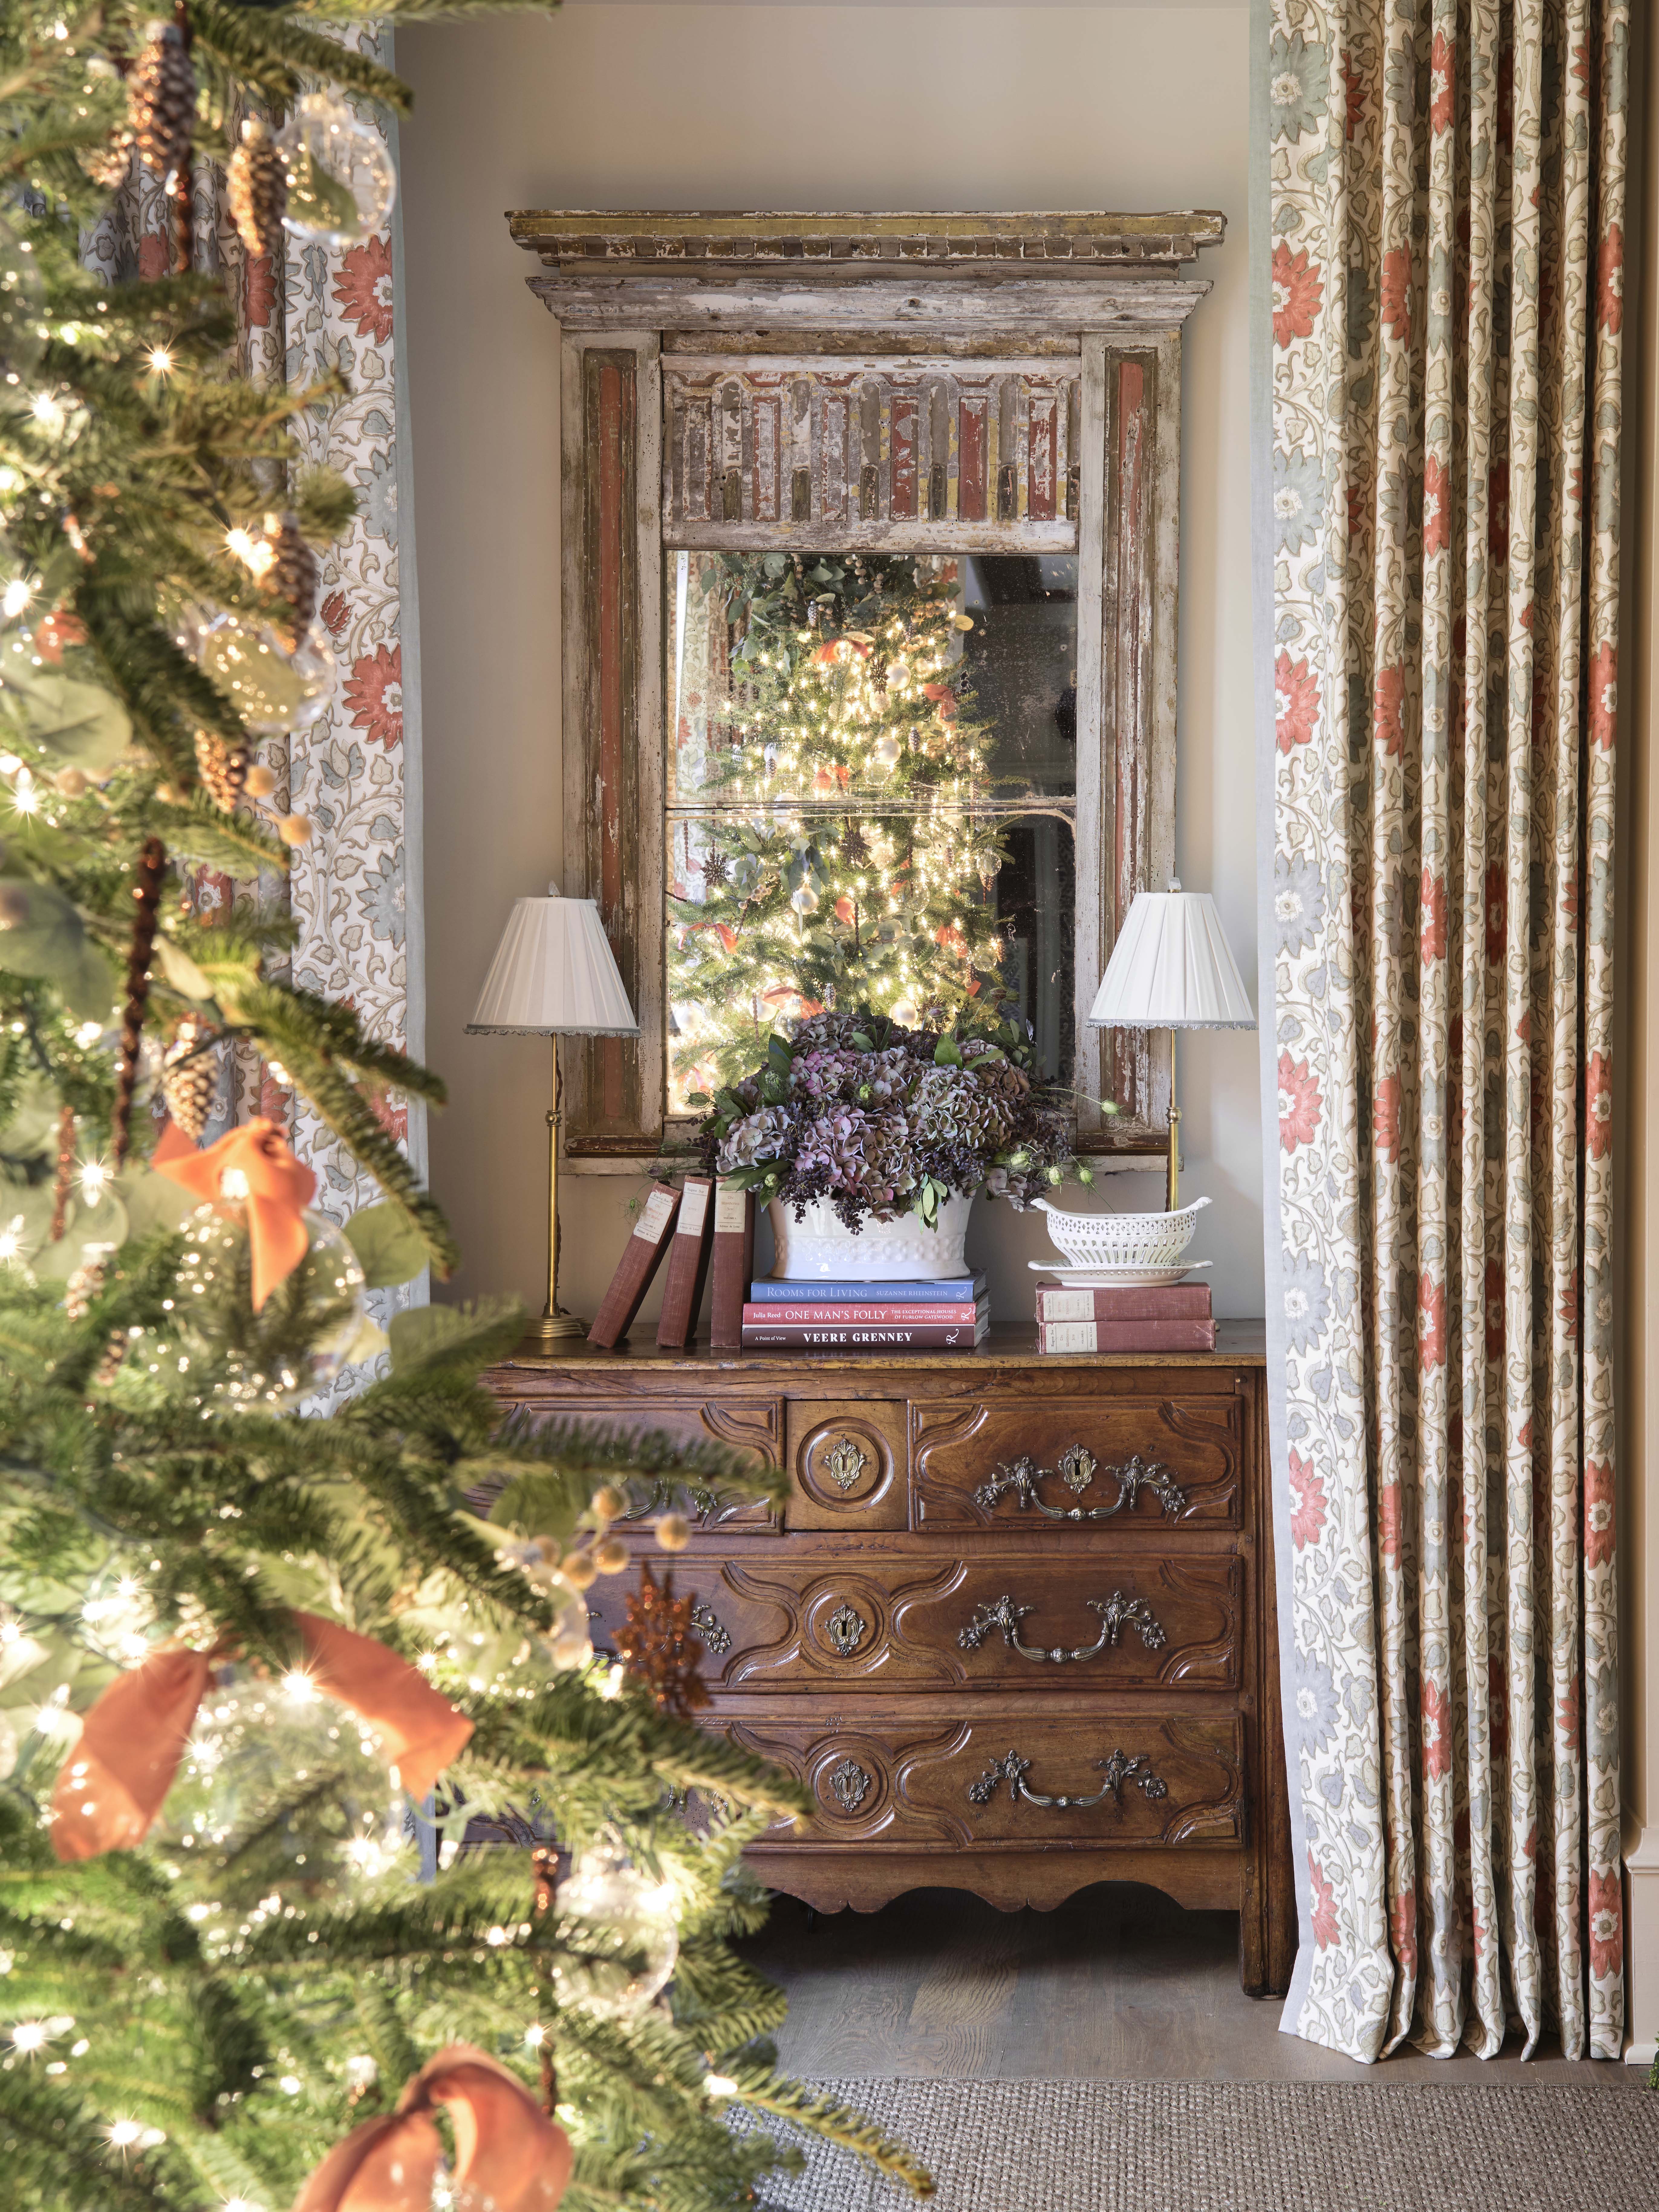 Living Room design by Lauren DeLoach in the Home for the Holidays Designer Showhouse on Stuffy Muffy.